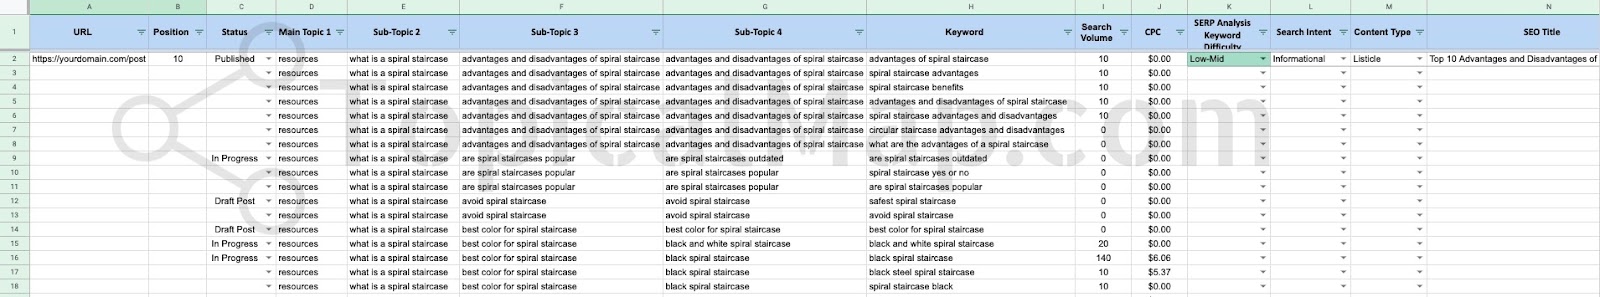 Examples of a spreadsheet topical map in SEO